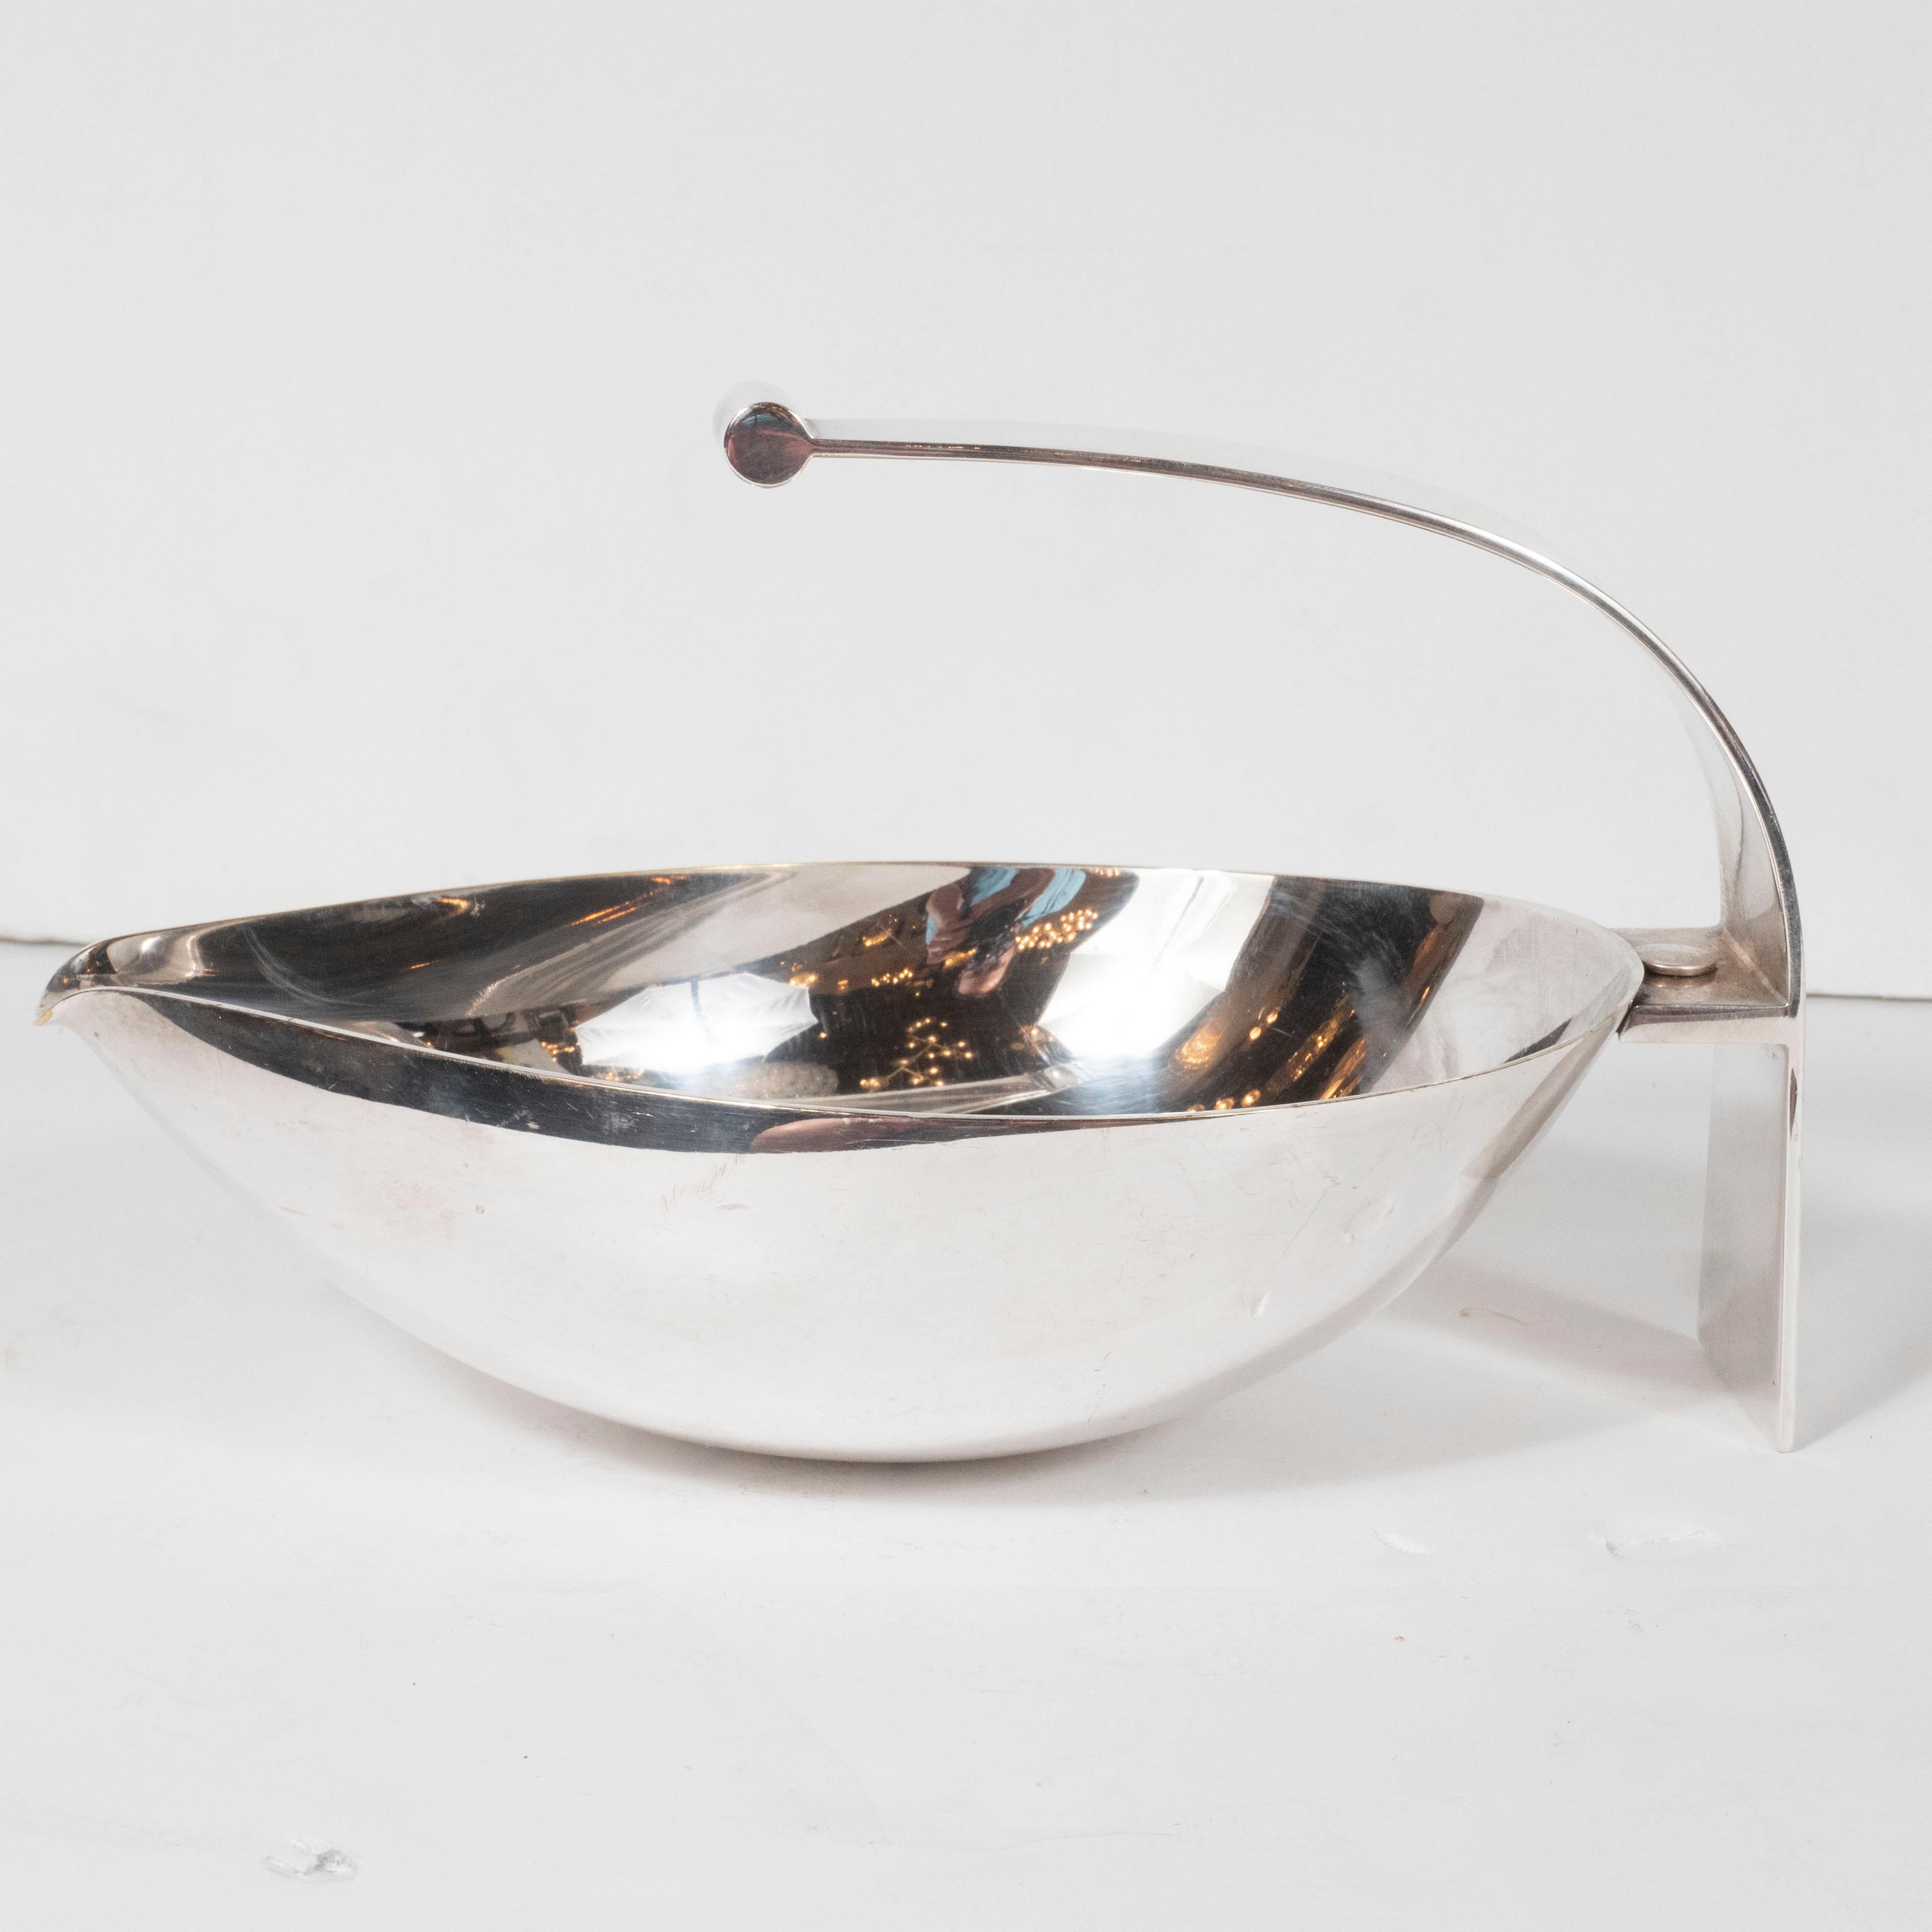 This elegant and atomic Mid-Century Modern silver plated decorative dish was realize by the celebrated Italian Mid-Century Modern firm Mesa circa 1960. It features an ovoid body with a curved handle that cantilevers over the body. With its